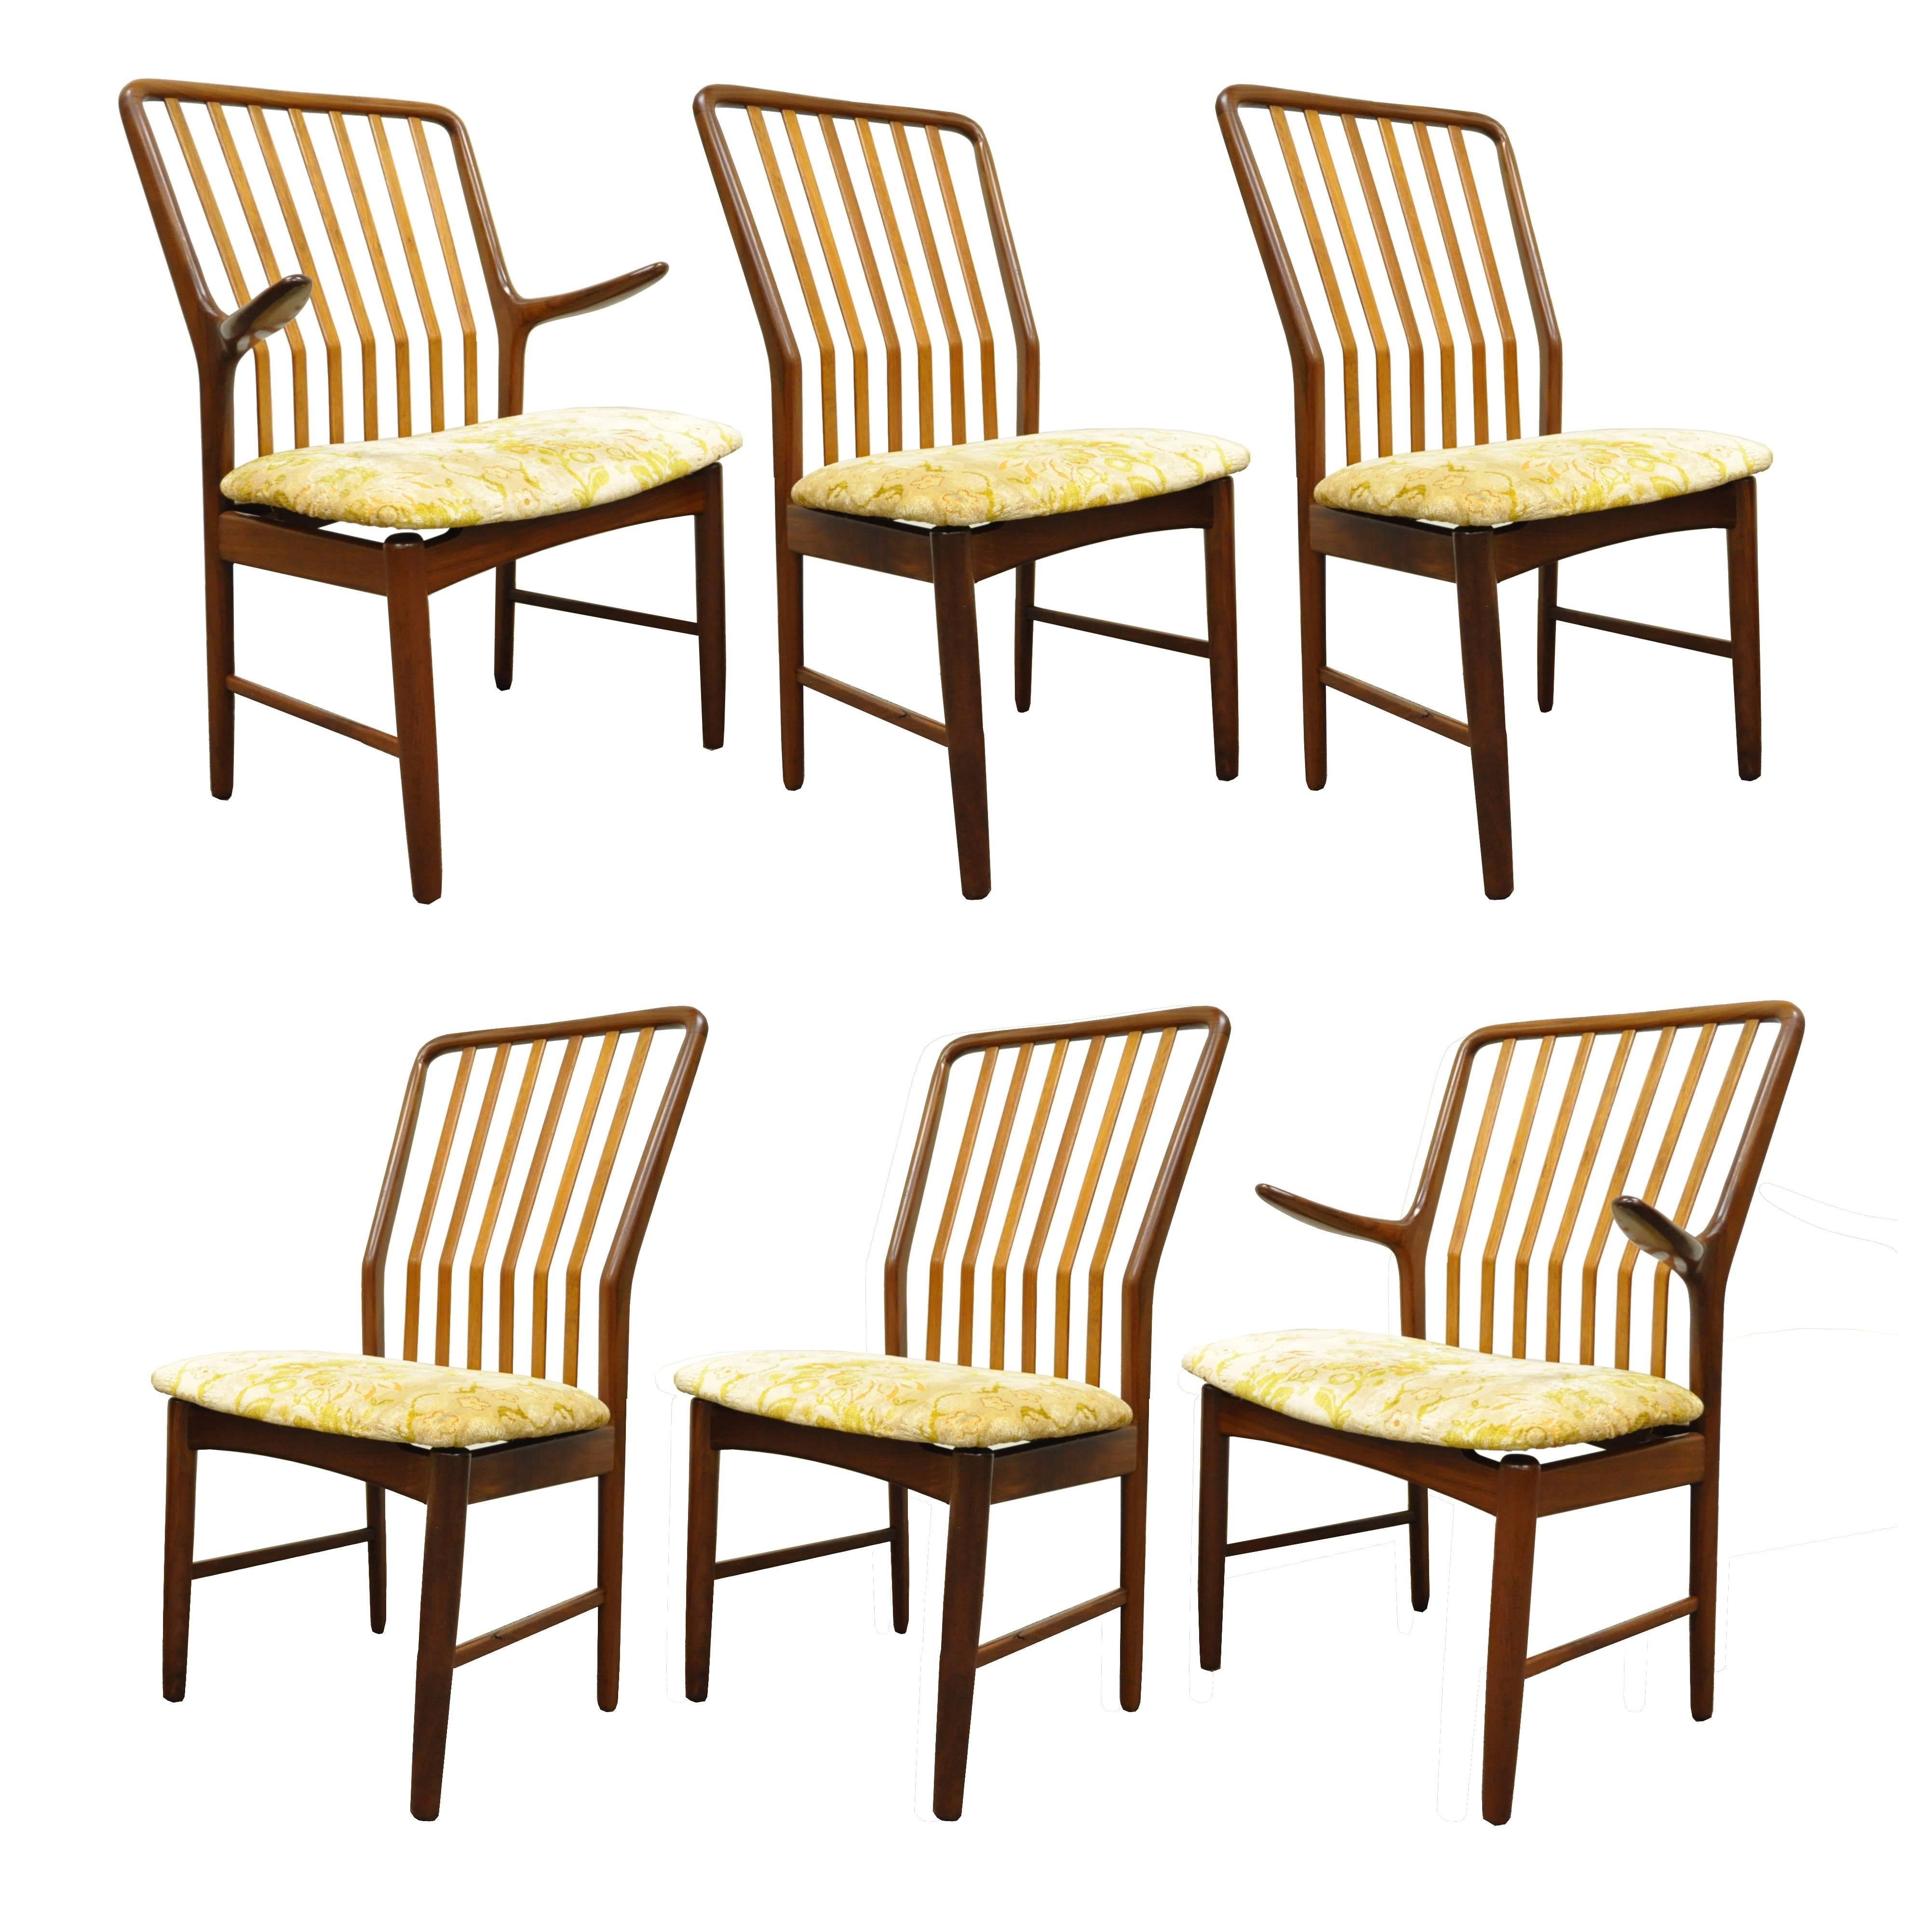 Great set of six sculpted solid teak Mid-Century Danish Modern dining room chairs designed by Svend A. Madsen and imported by Moreddi. The set includes two armchairs and four side chairs all with great shape and form. 

Armchairs: 36